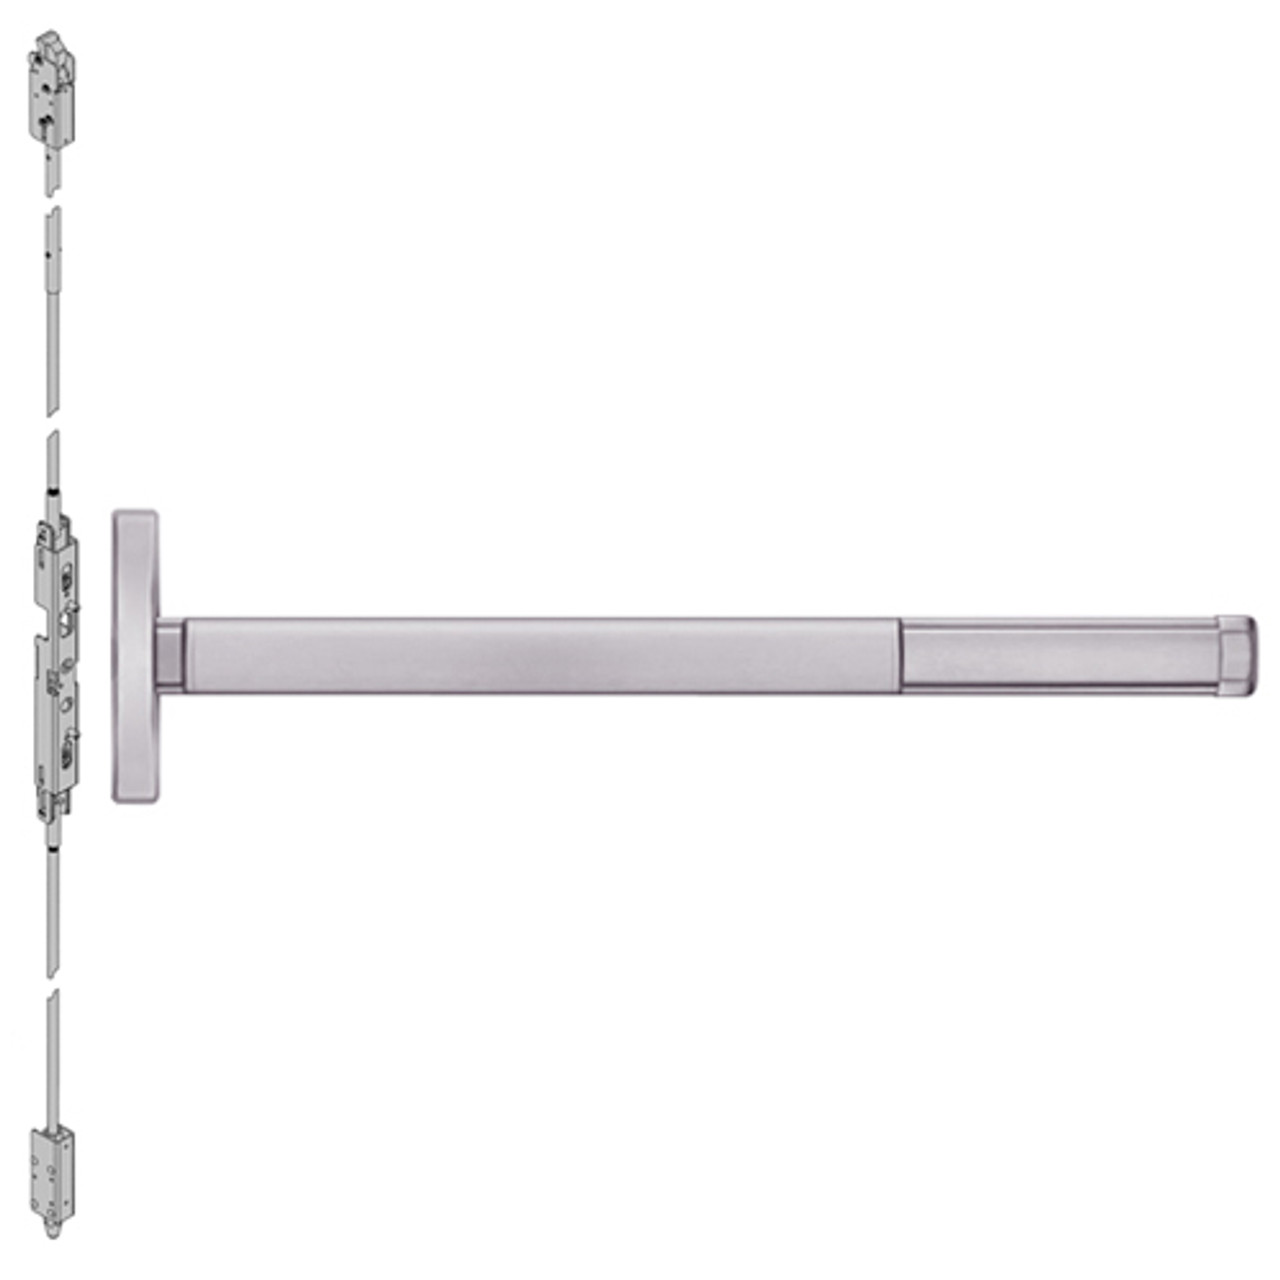 ELR2601LBR-630-48 PHI 2600 Series Concealed Vertical Rod Exit Device with Electric Latch Retraction Prepped for Cover Plate in Satin Stainless Steel Finish